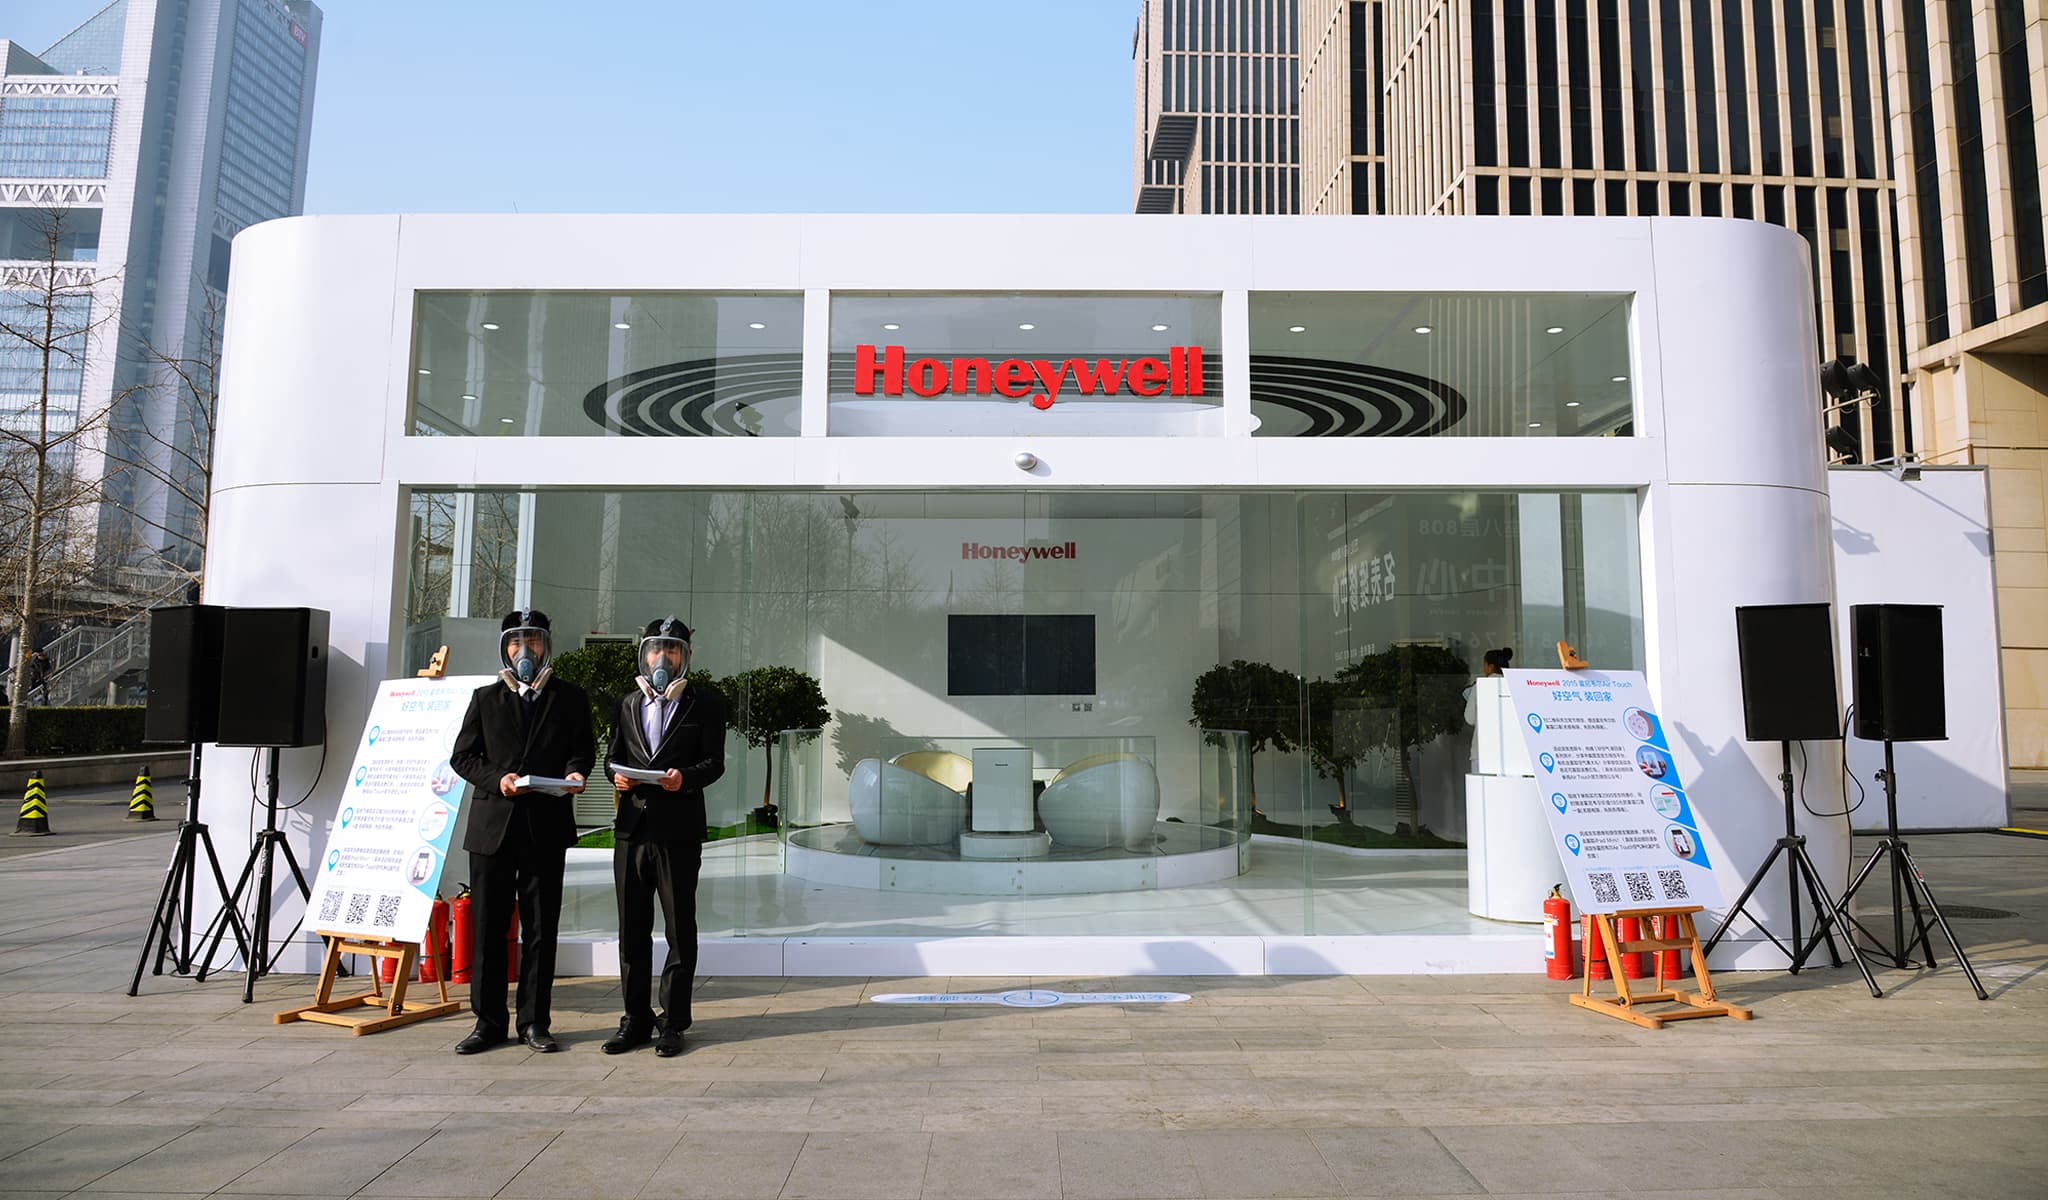 Road show event for Honeywell at a mall in Shanghai